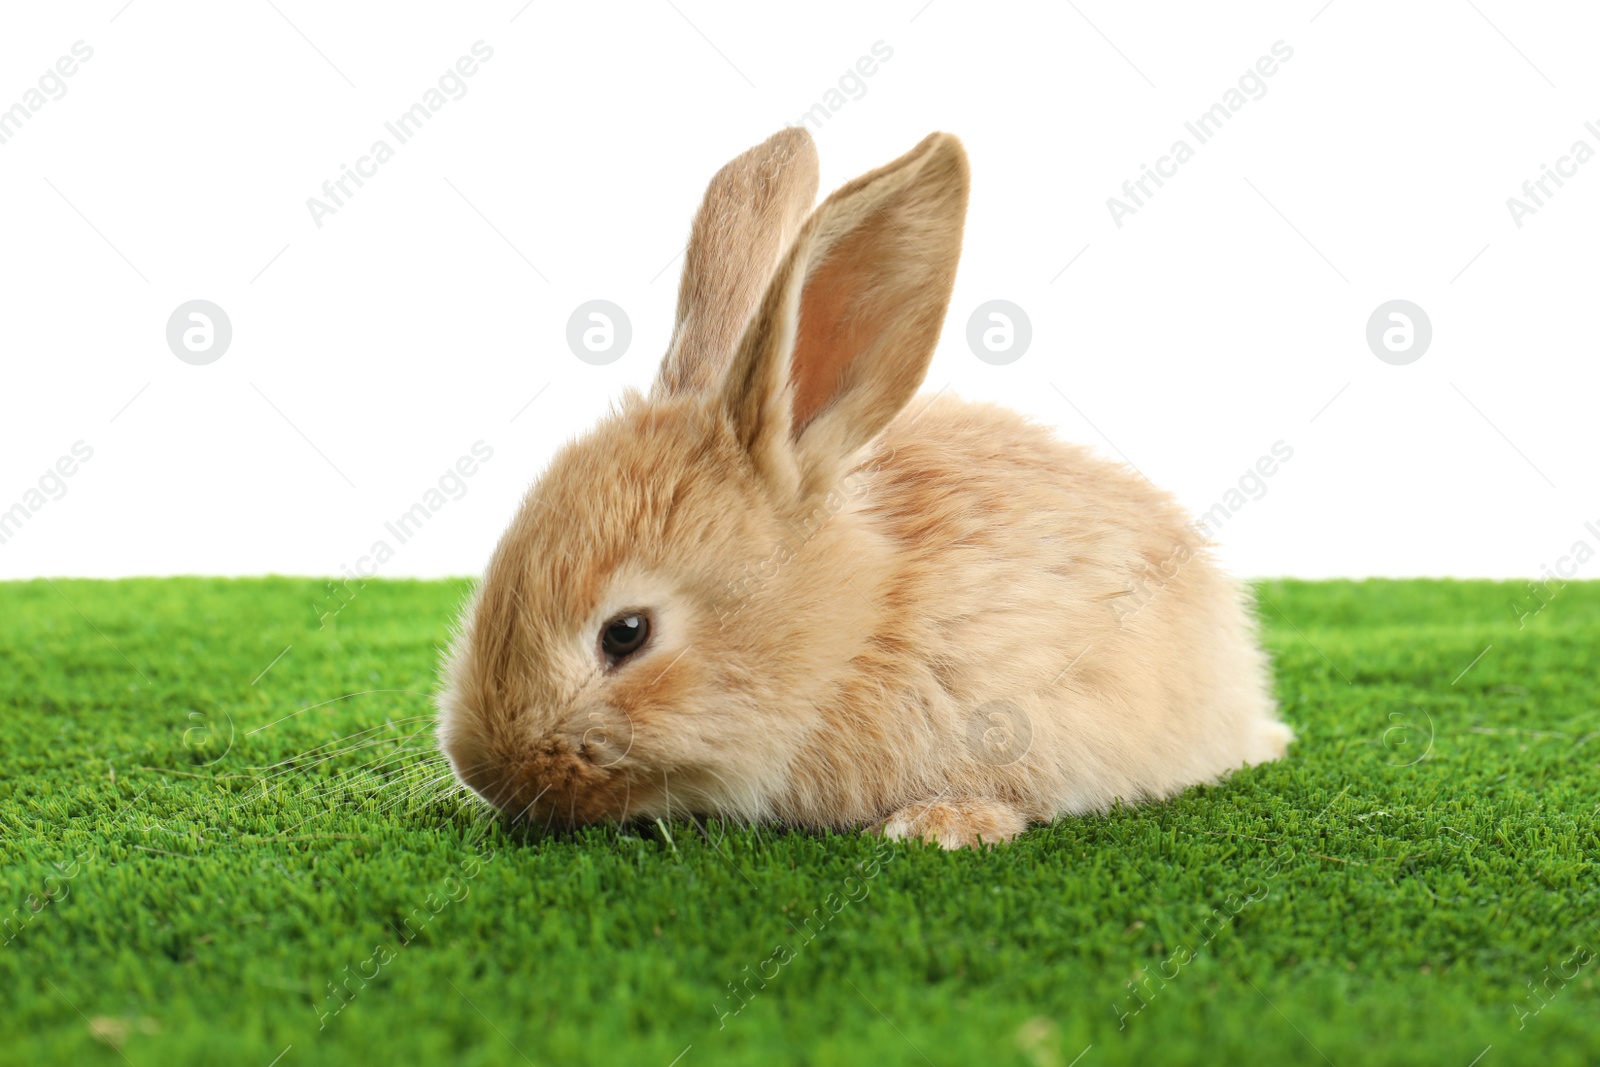 Photo of Adorable furry Easter bunny on green grass against white background